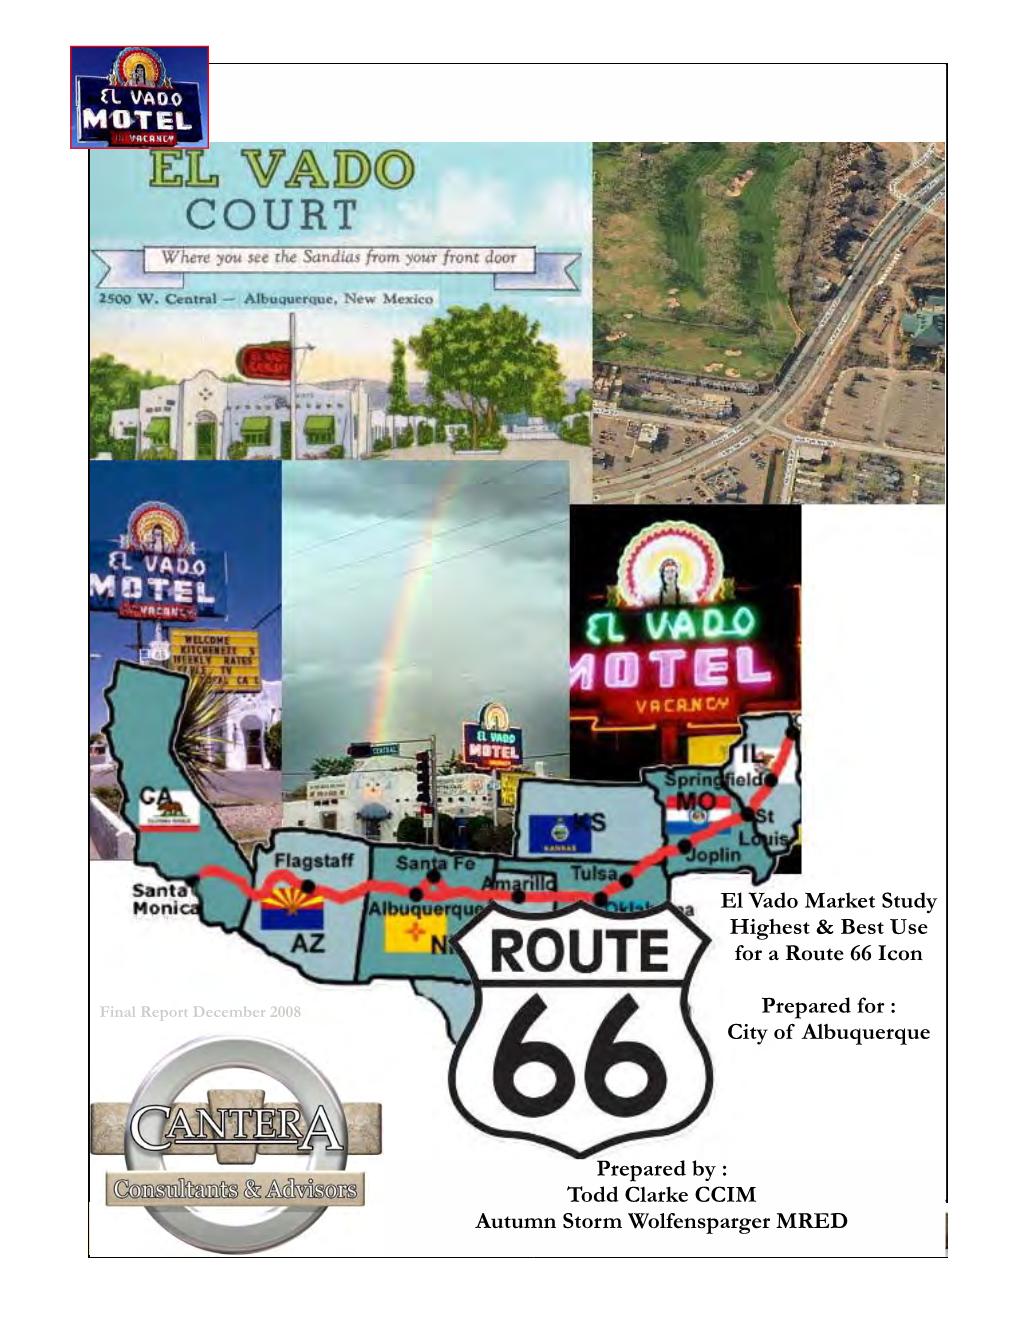 1-1 El Vado Market Study Highest & Best Use for a Route 66 Icon Prepared